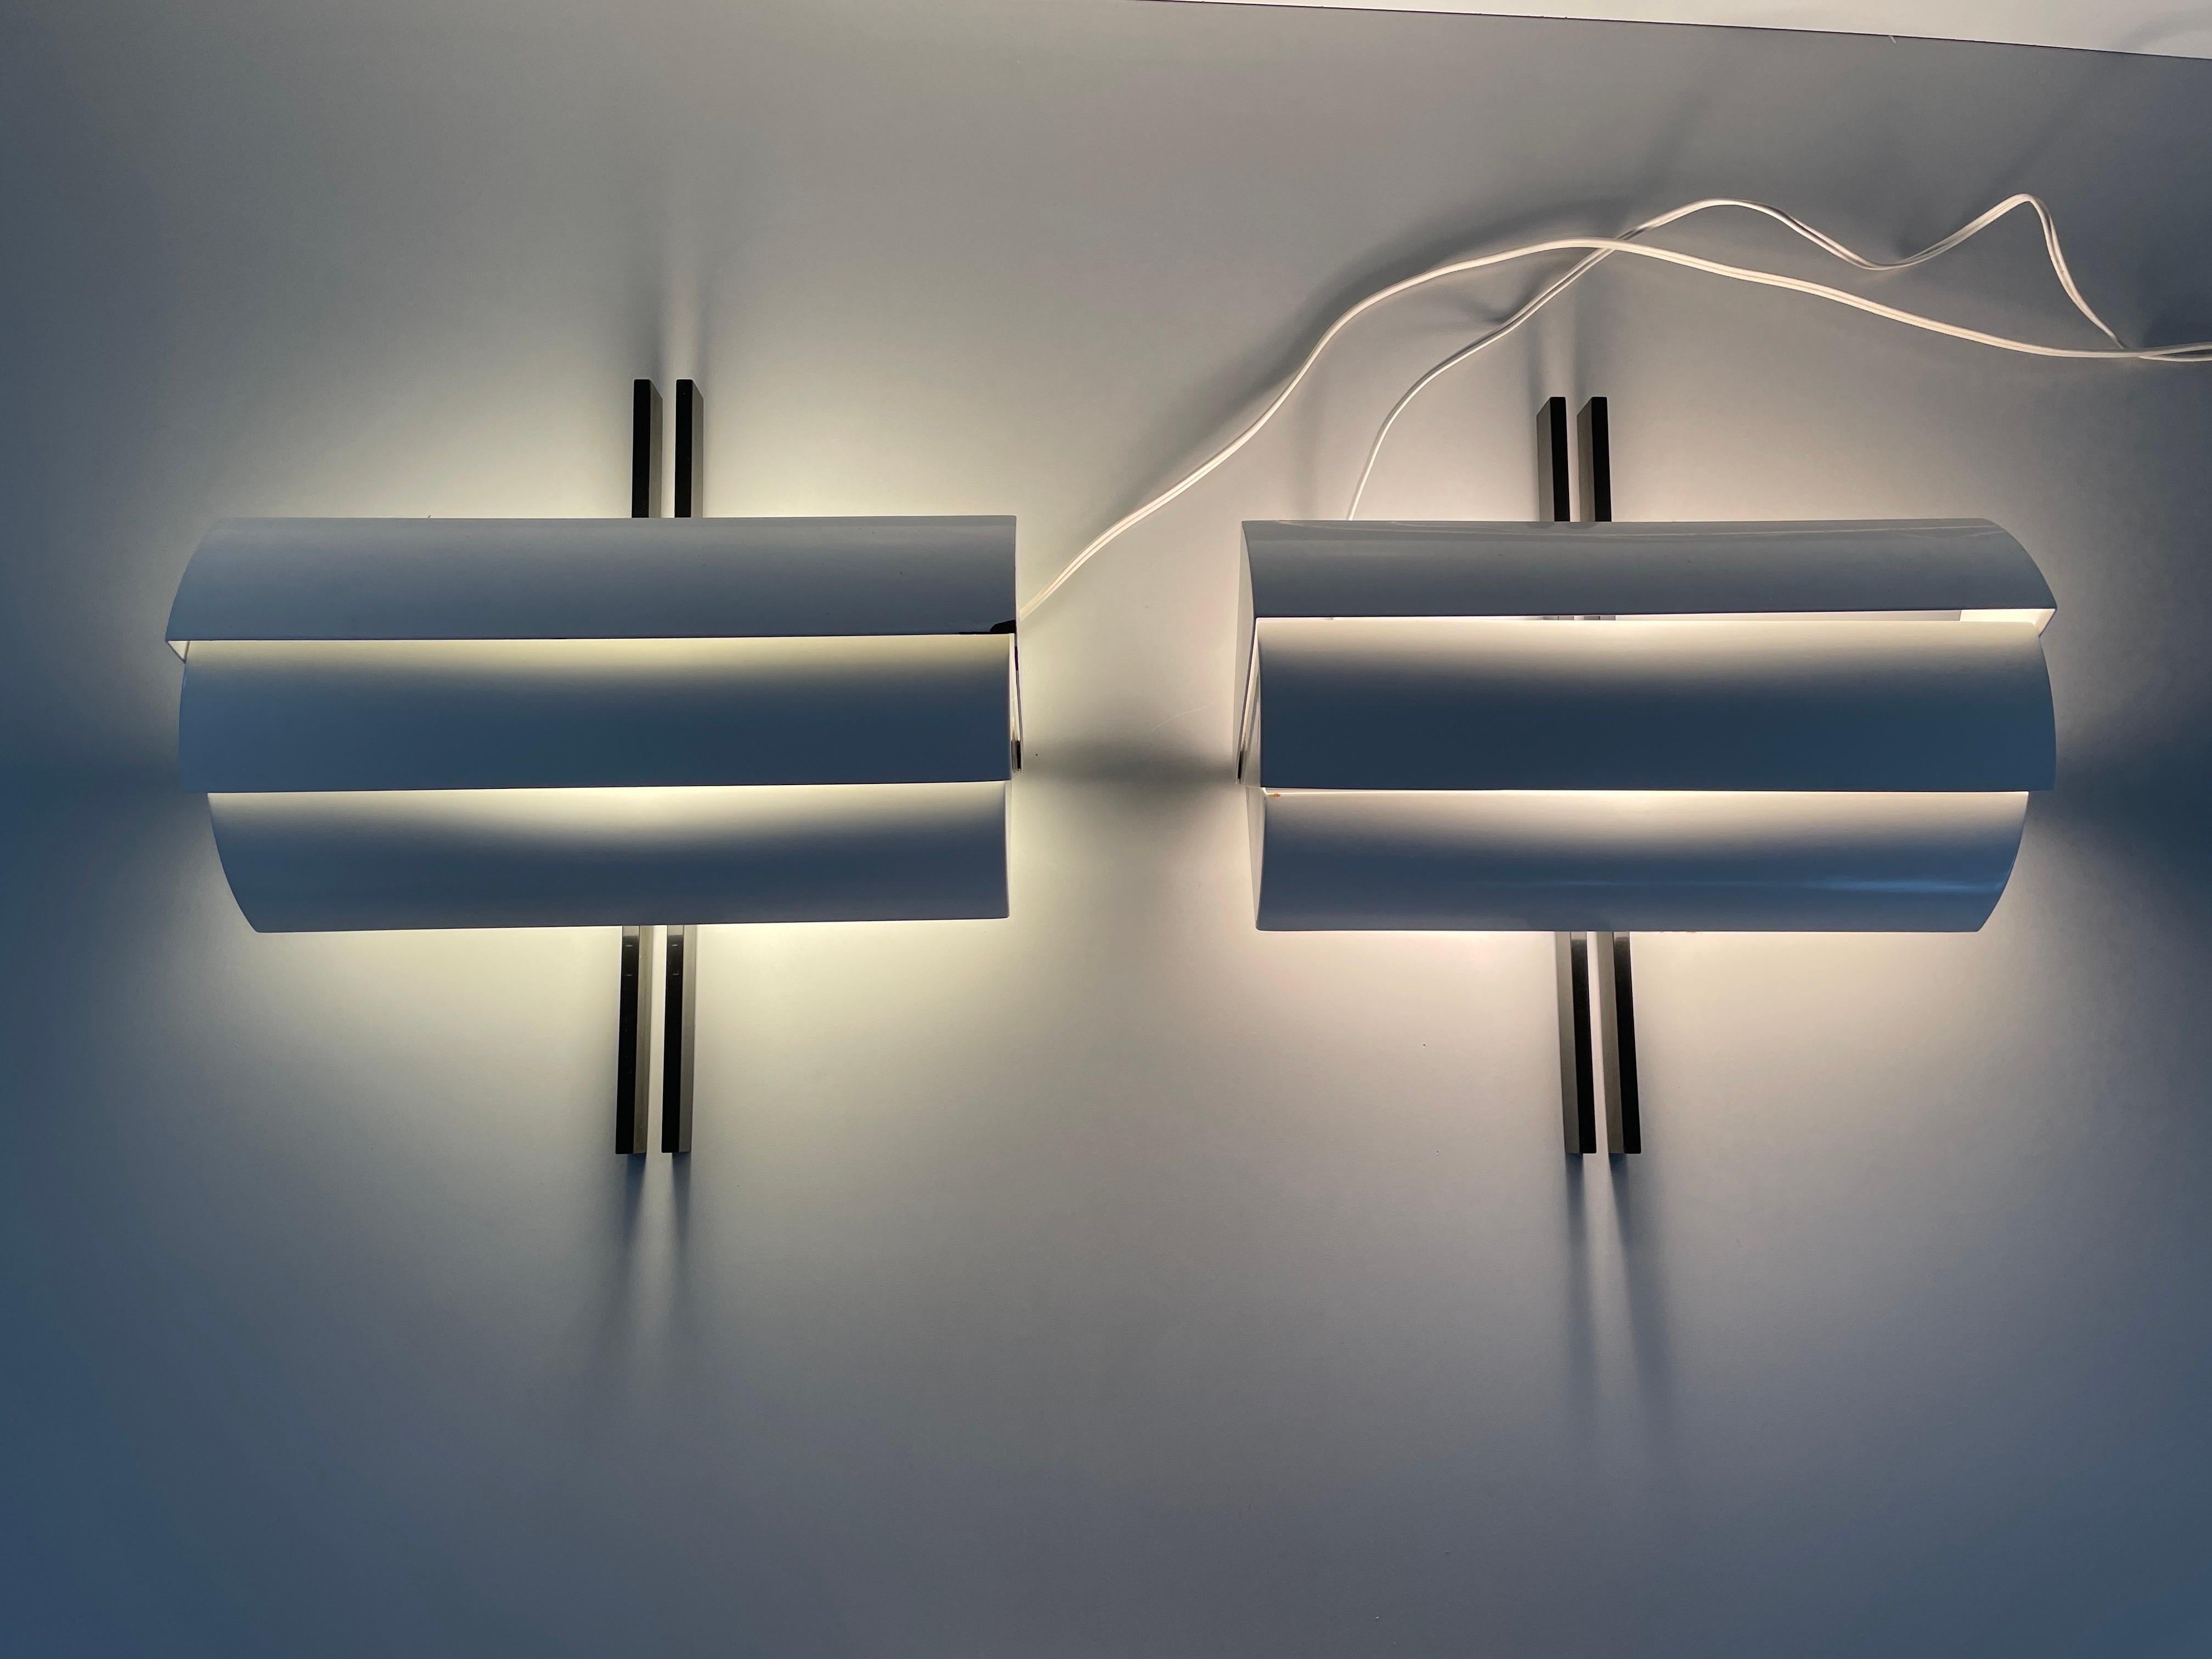 Black and White Metal Pair of Sconces by E. Gismondi for Artemide, 1970s, Italy For Sale 4